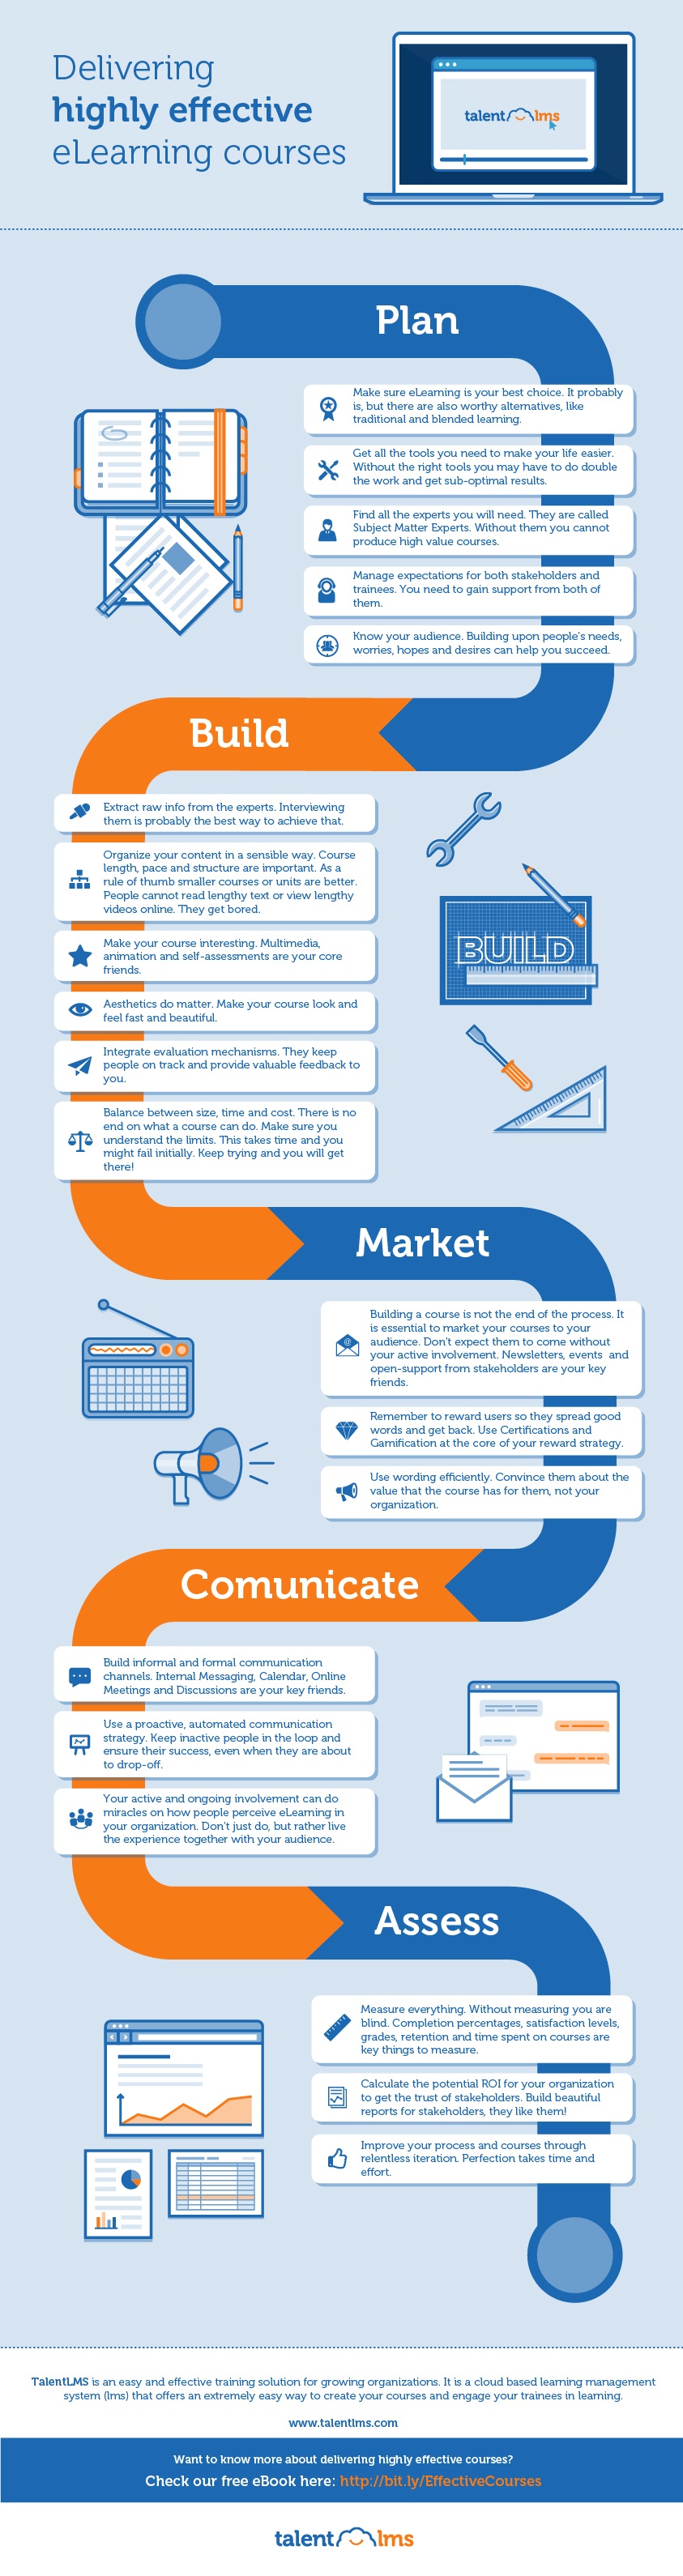 Delivering Highly Effective eLearning Courses Infographic